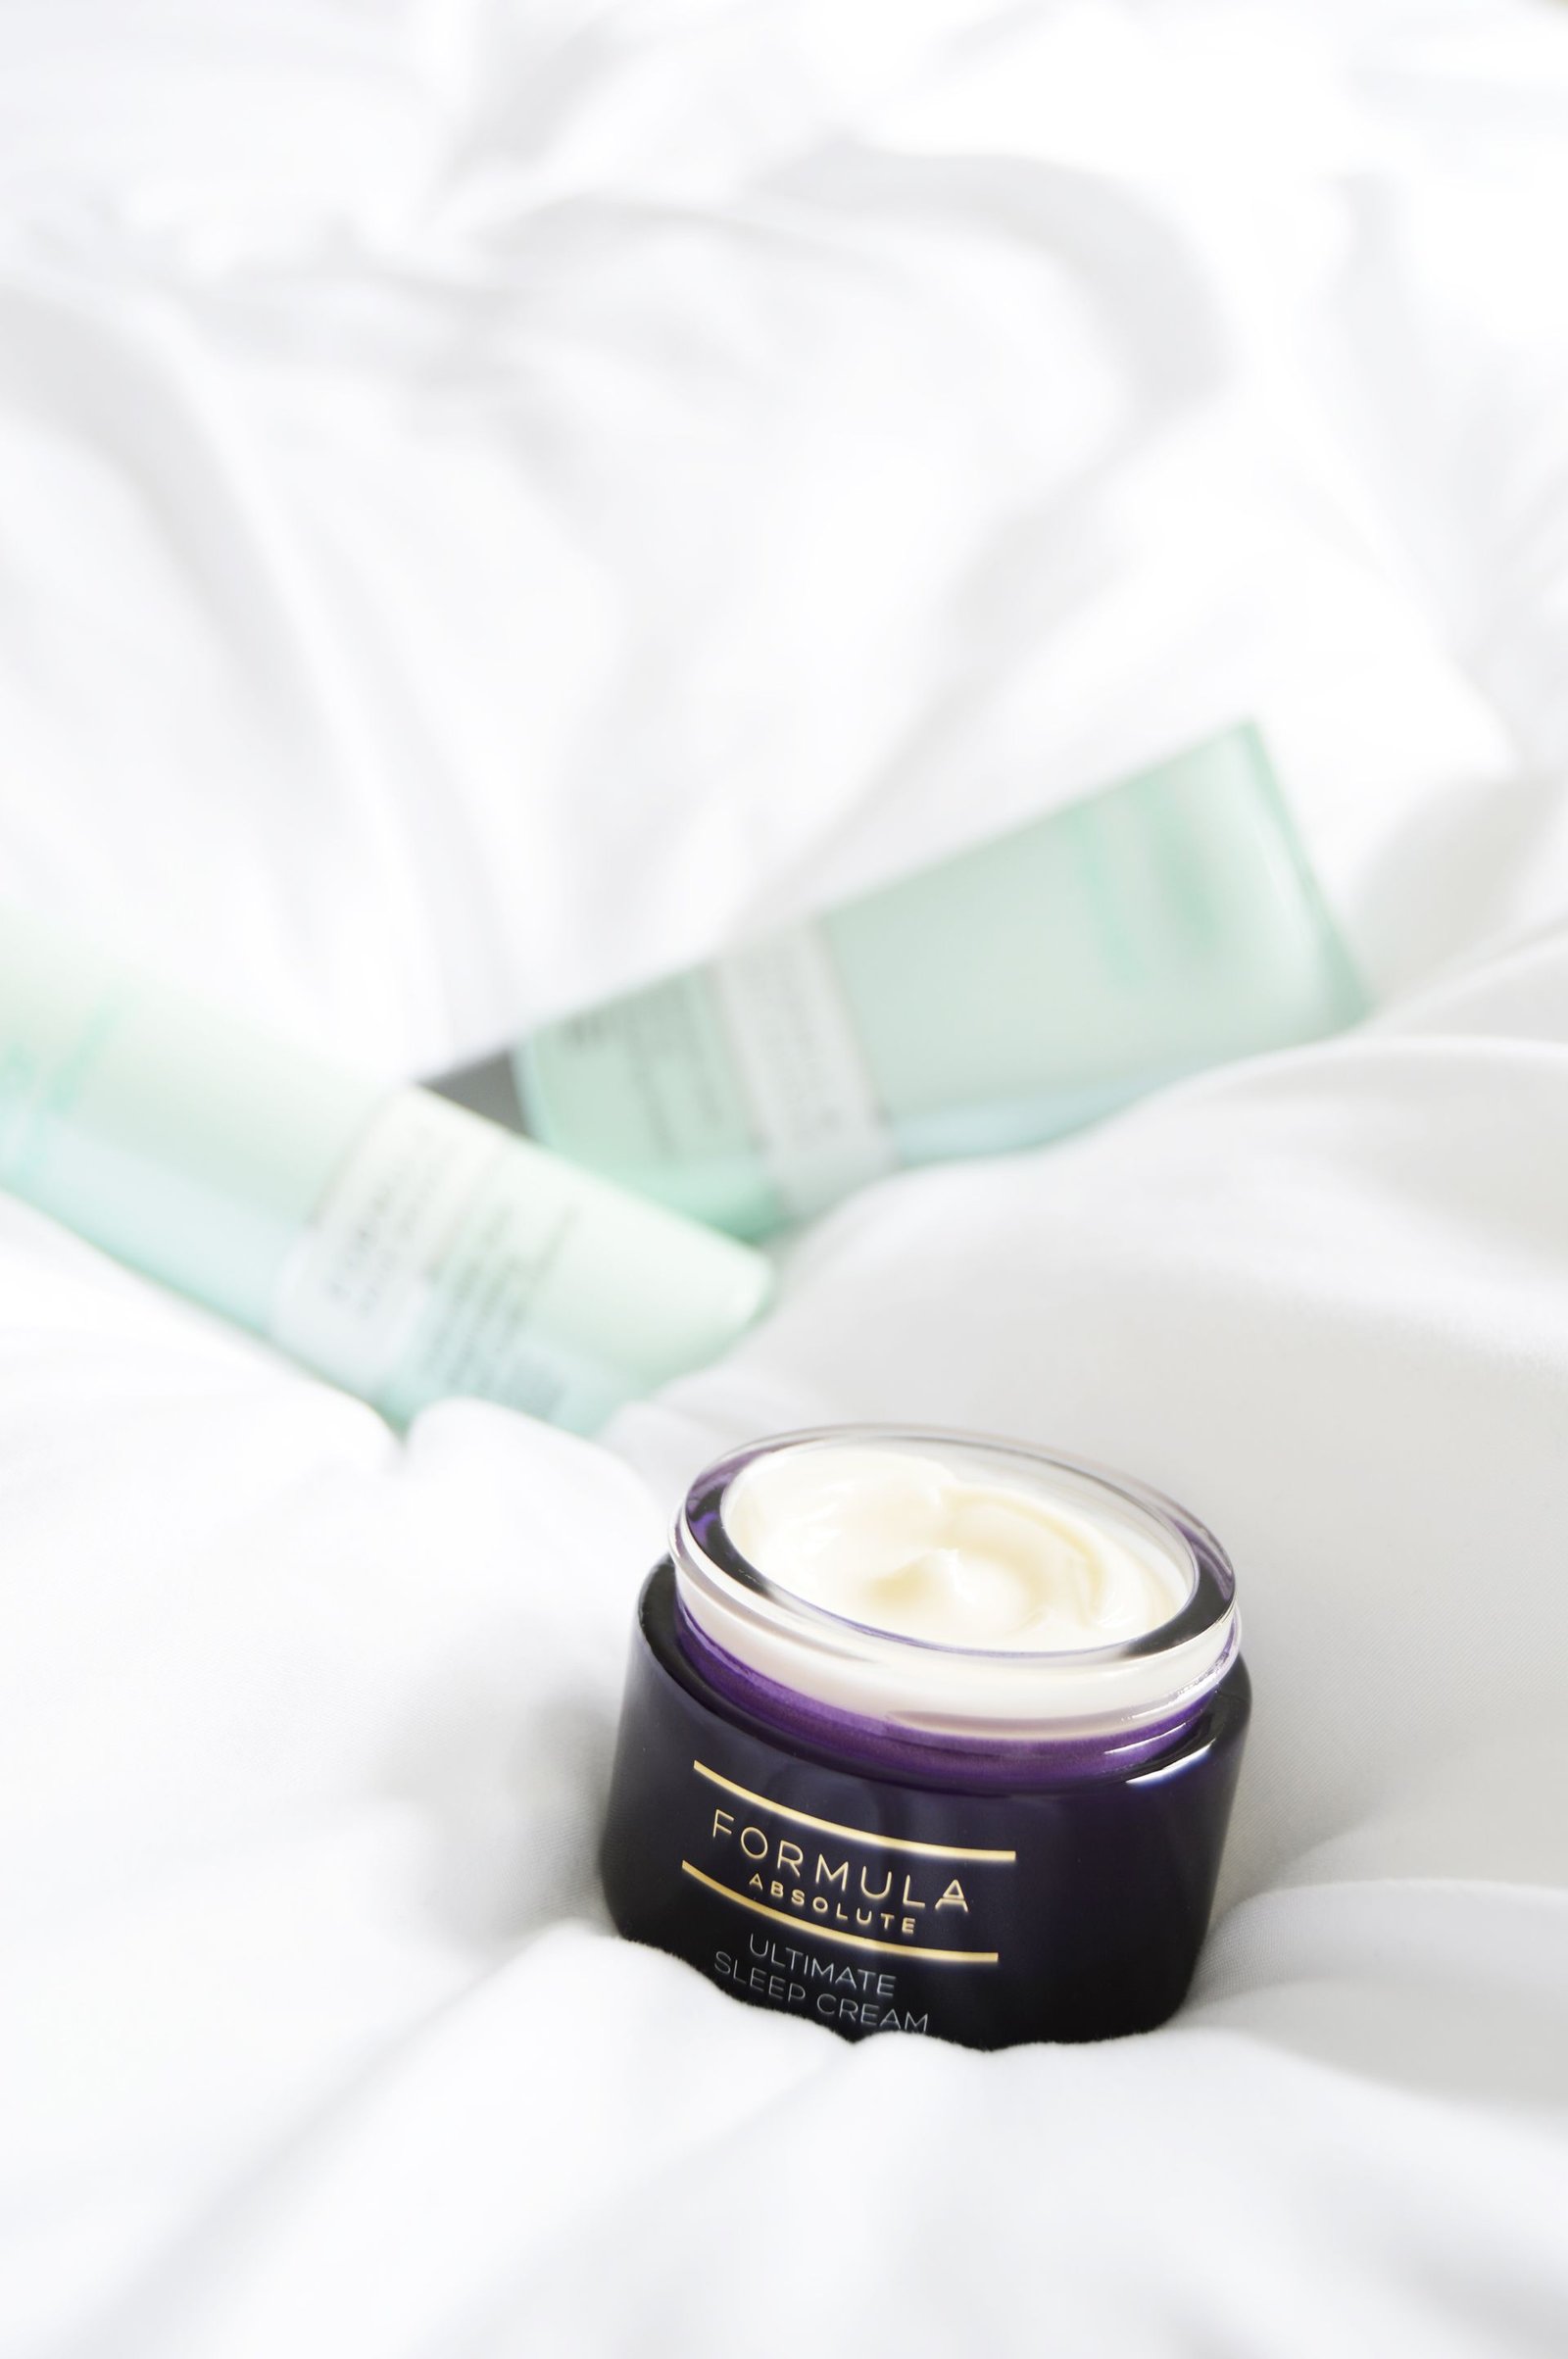 You don't always need to spend tons of money on skincare products. M&S FORMULA Skincare has many products that are reasonably priced and deliver! FORMULA Absolute Ultimate Sleep Cream Review